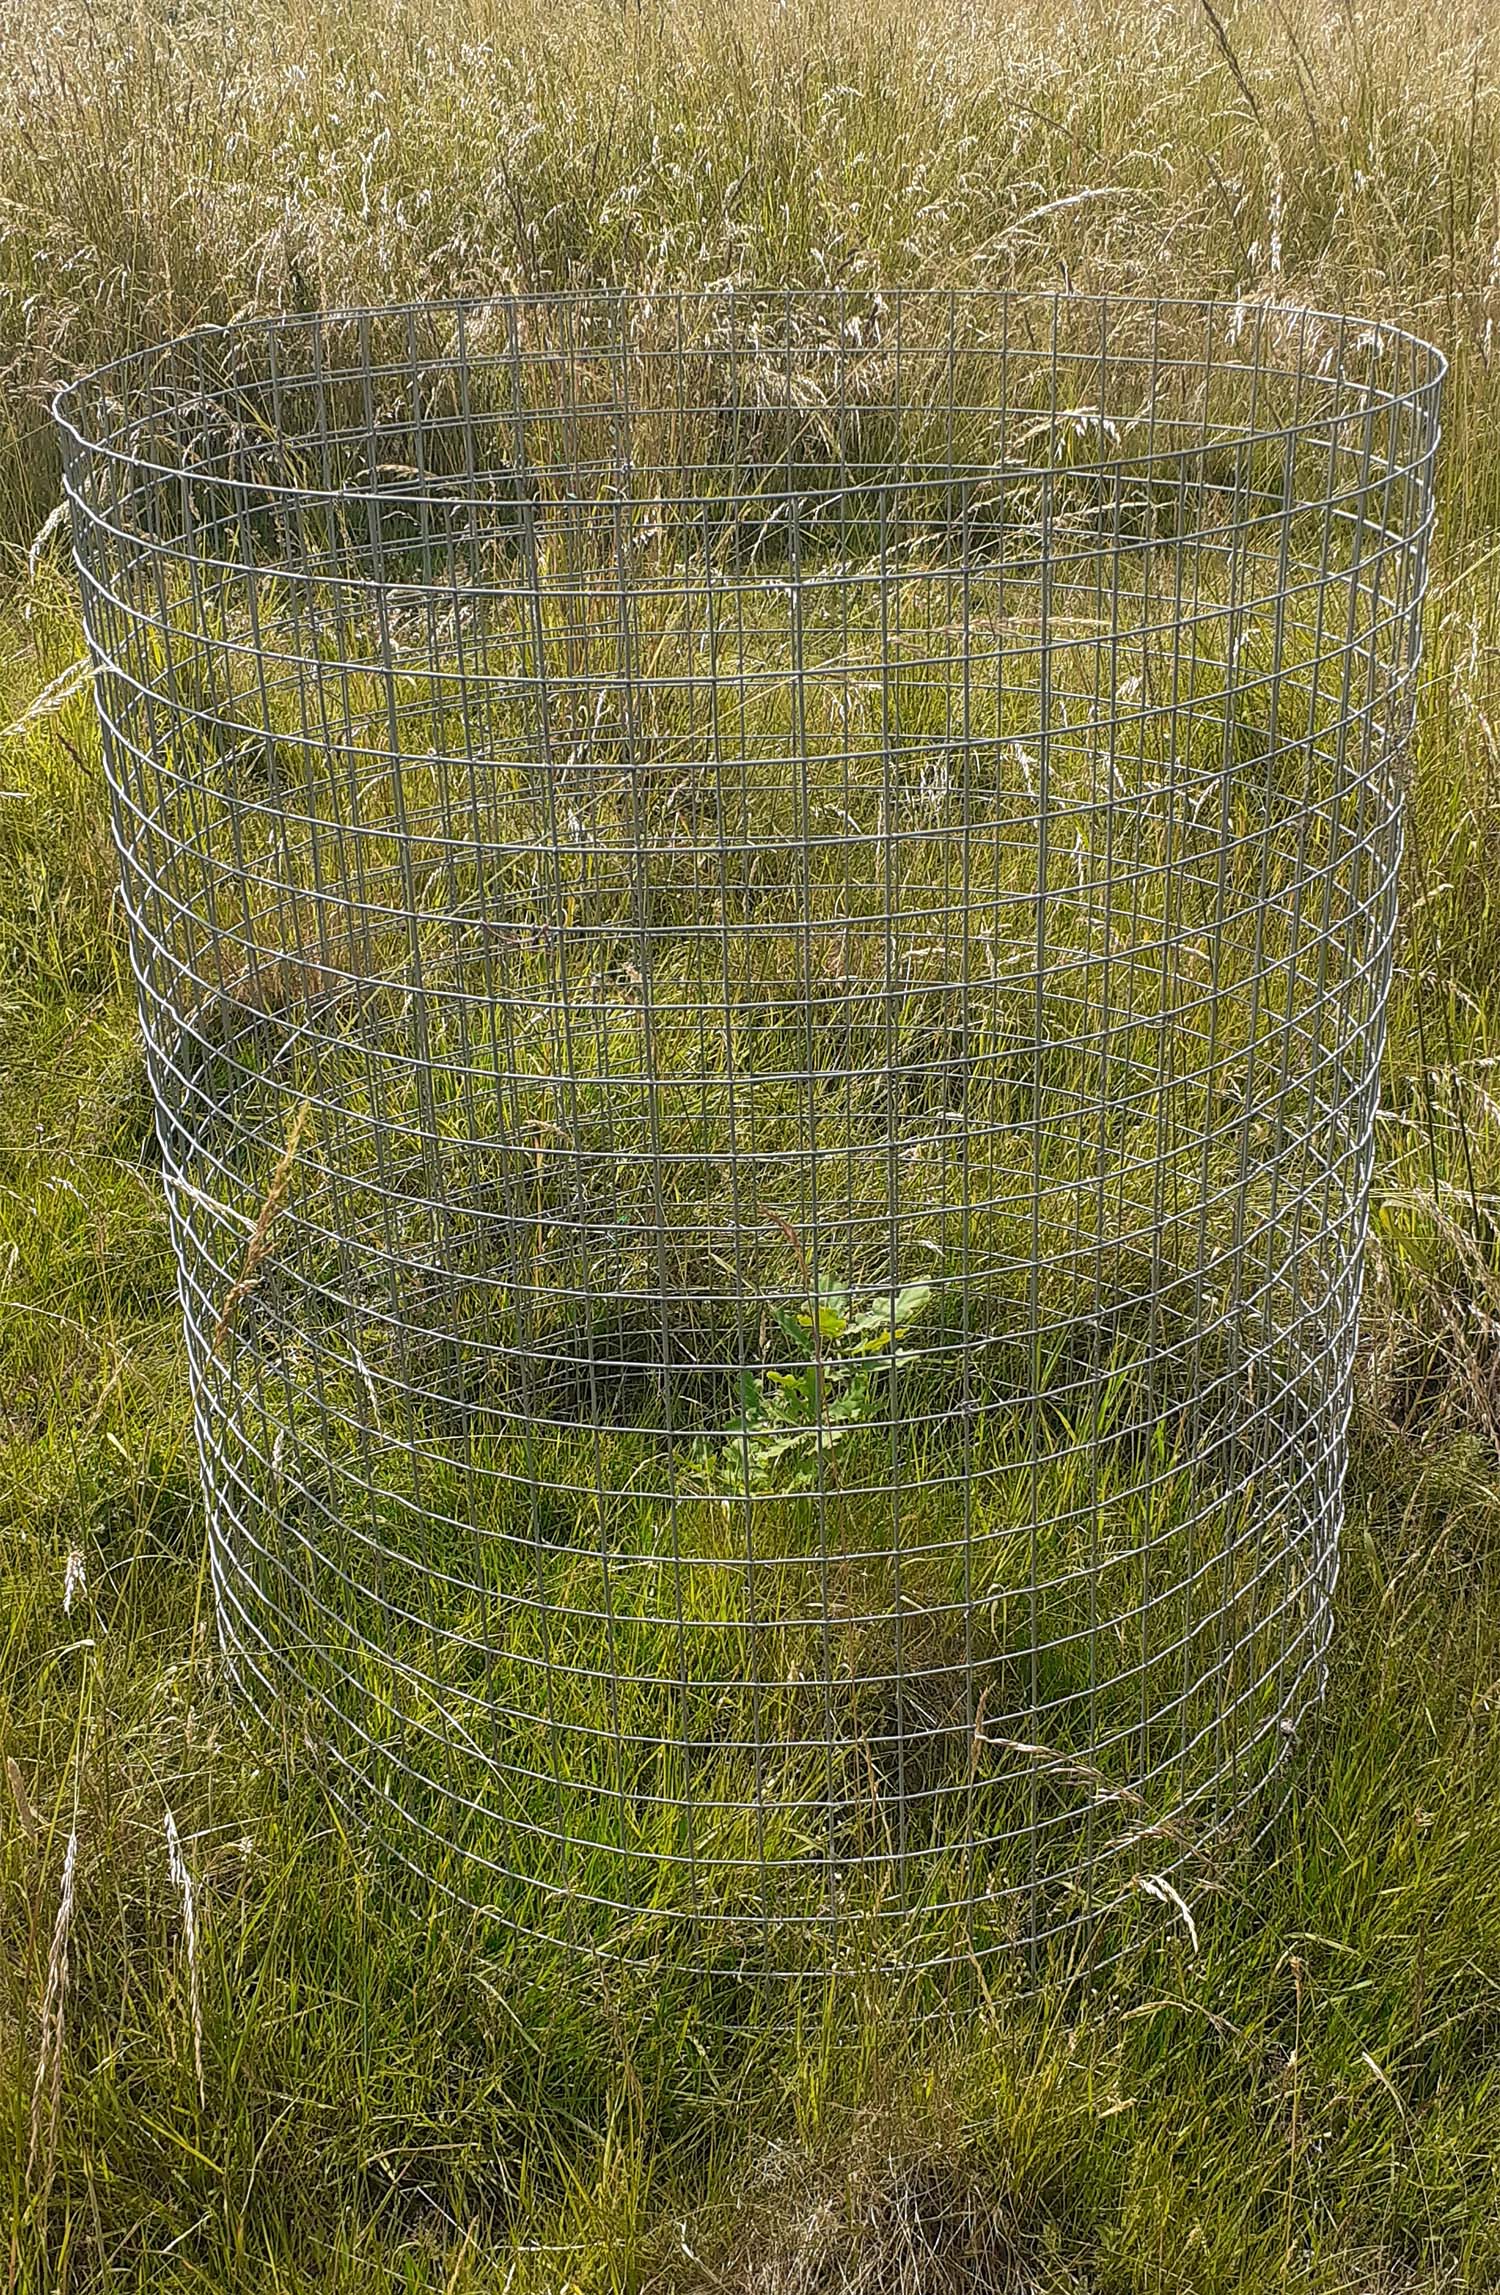 A small oak sapling surrounded by a cylinder of wire fencing